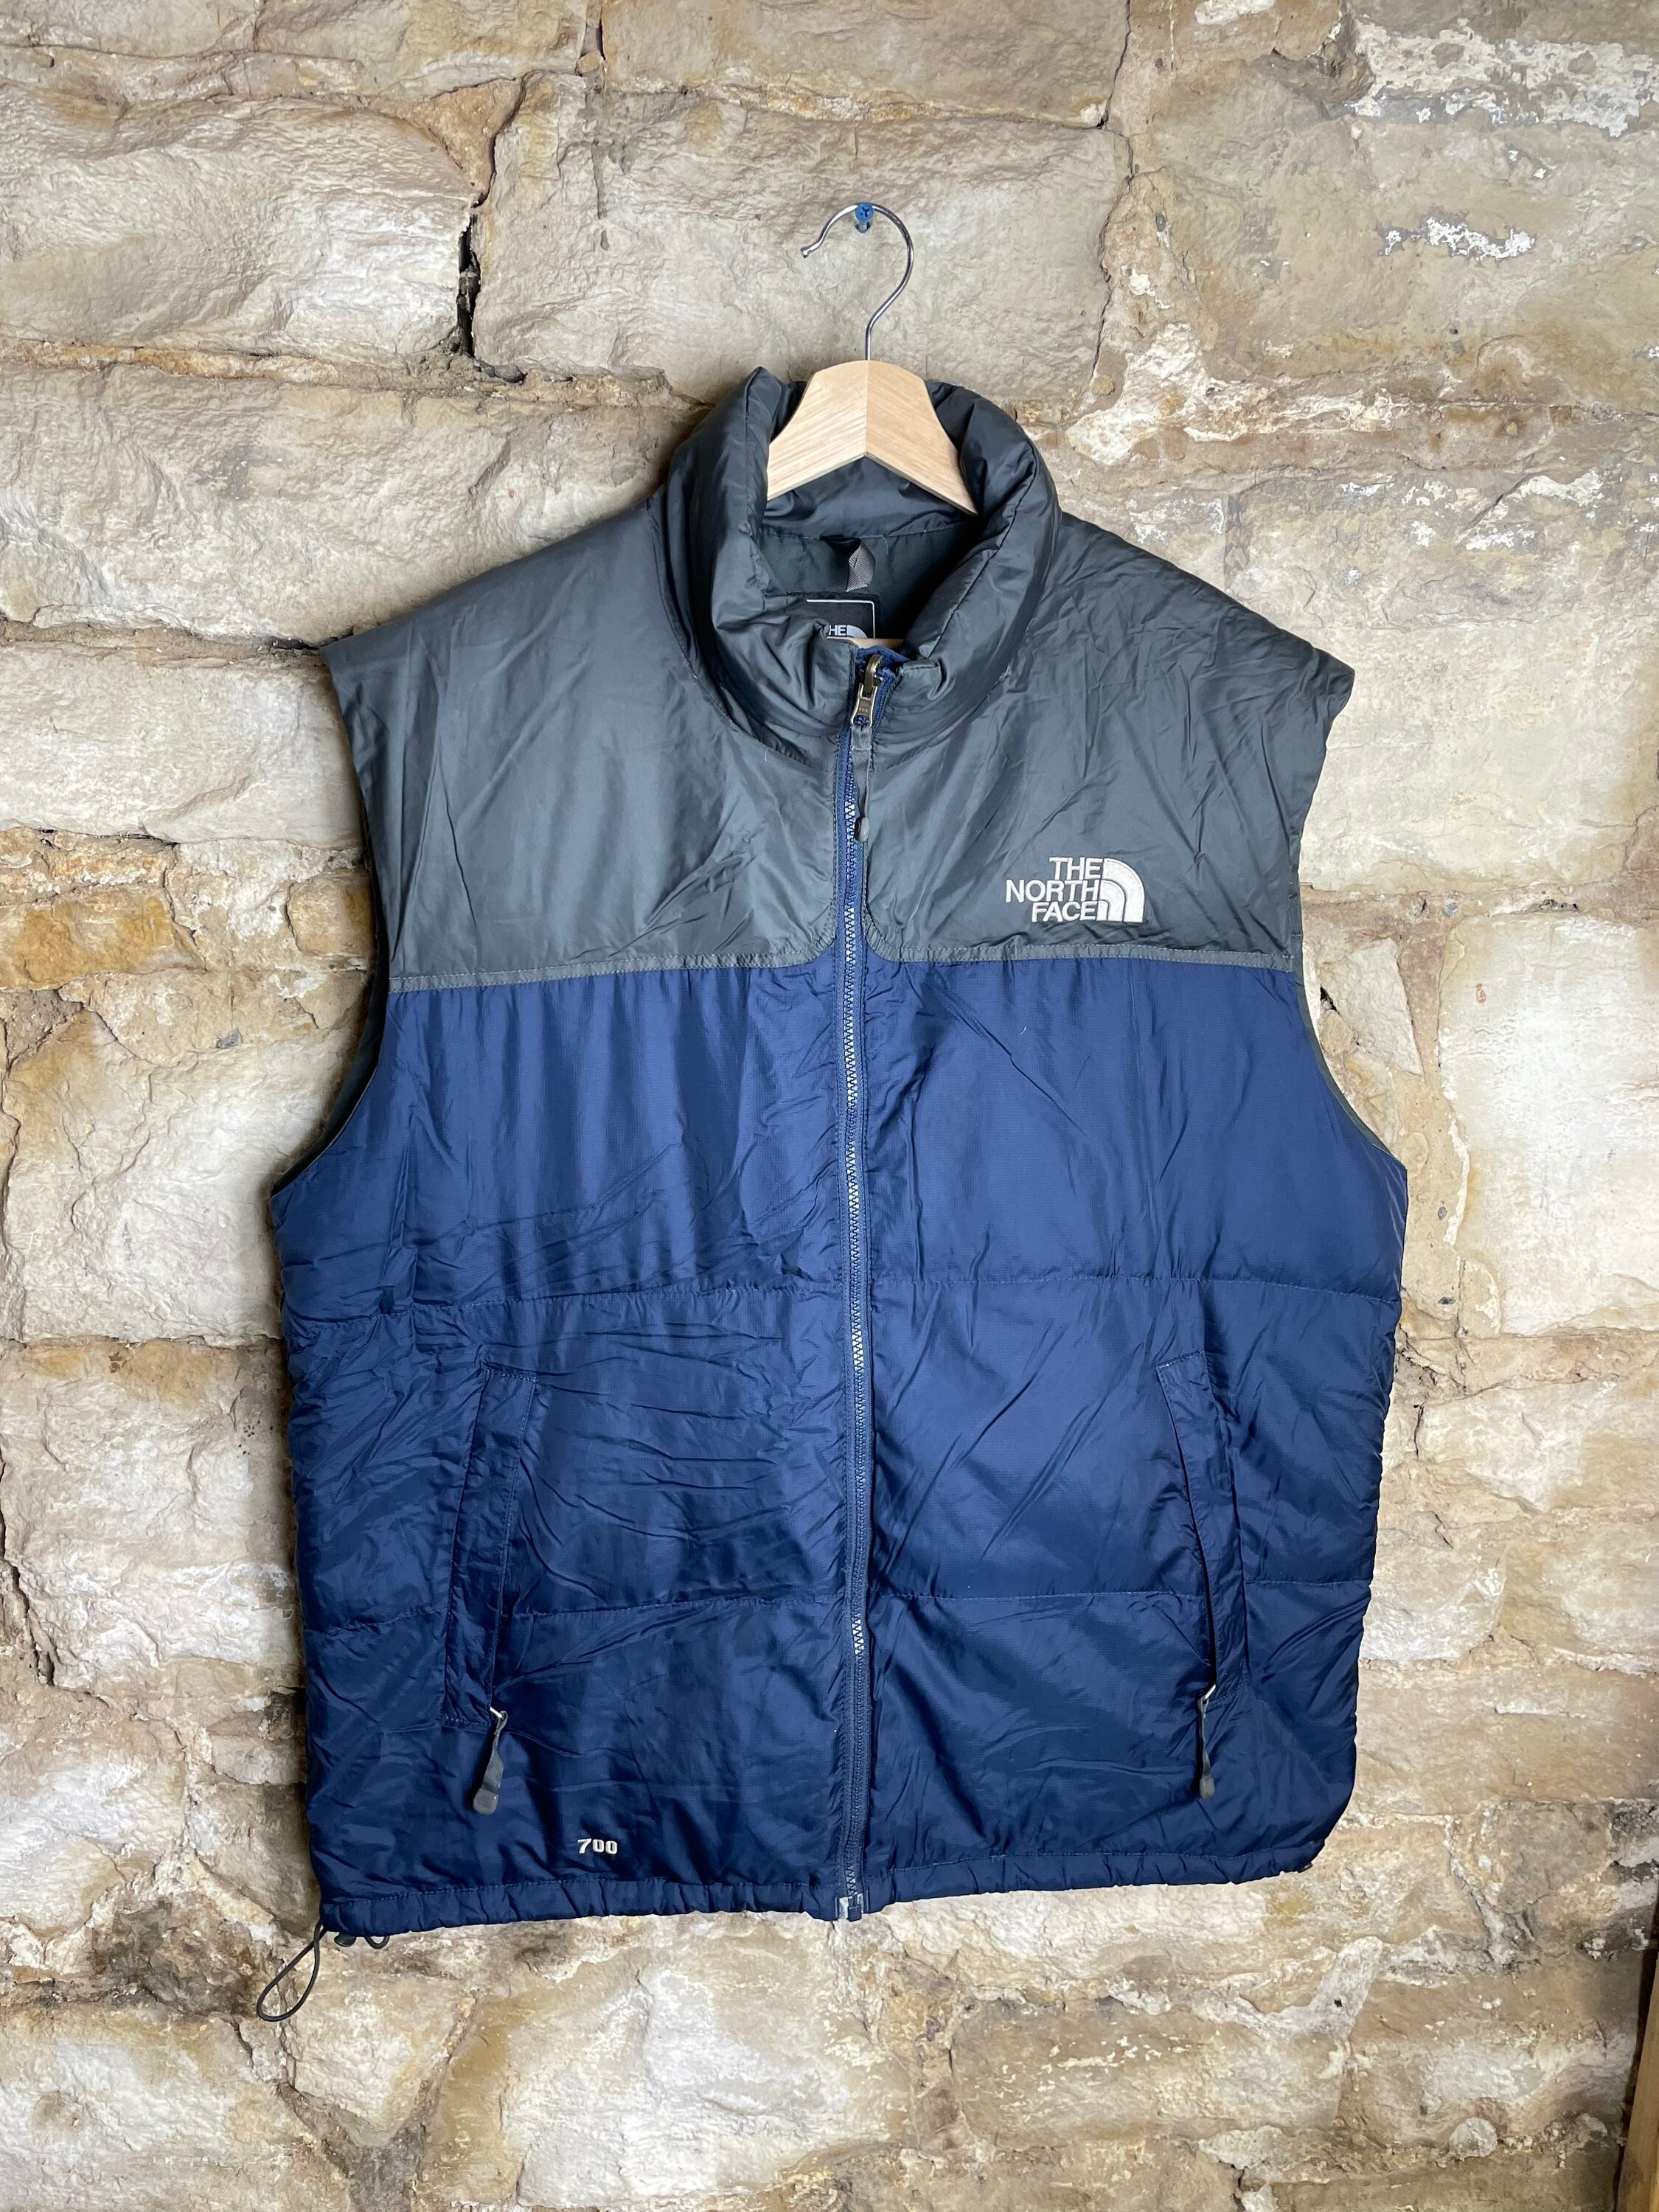 Vintage 90s Y2K the North Face Puffer Fill Vest 700 XL - Etsy